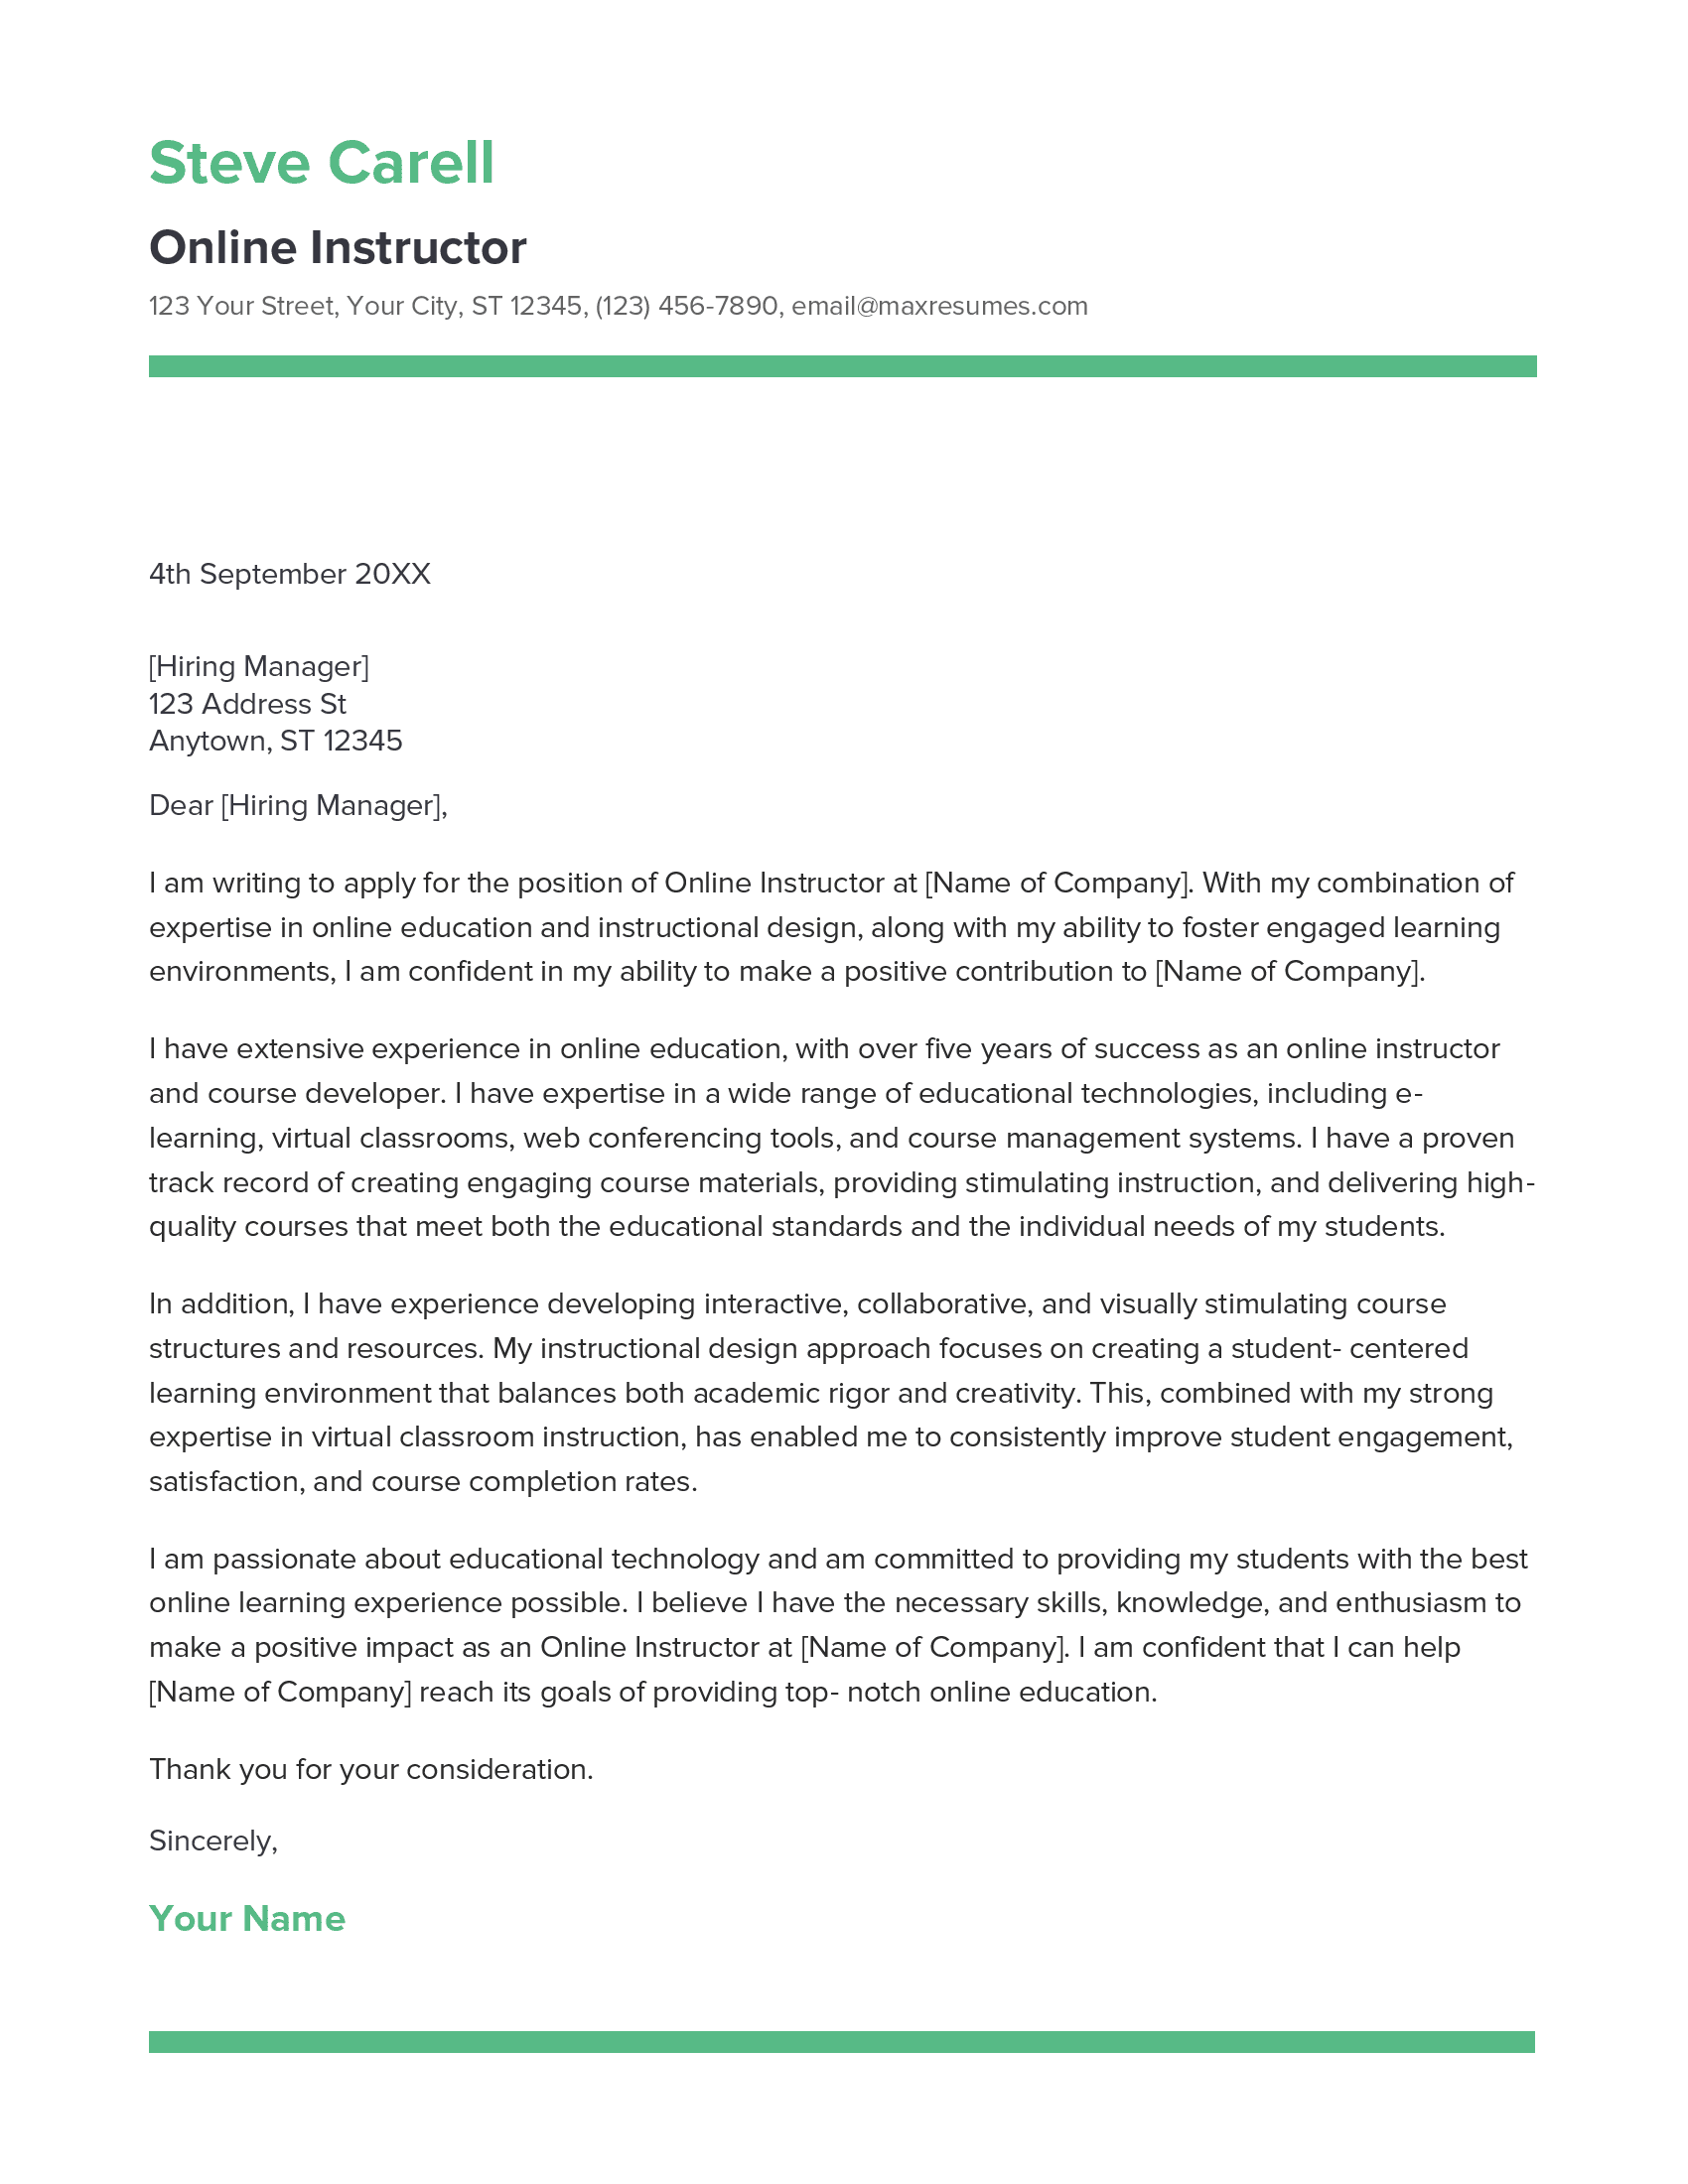 Online Instructor Cover Letter Example